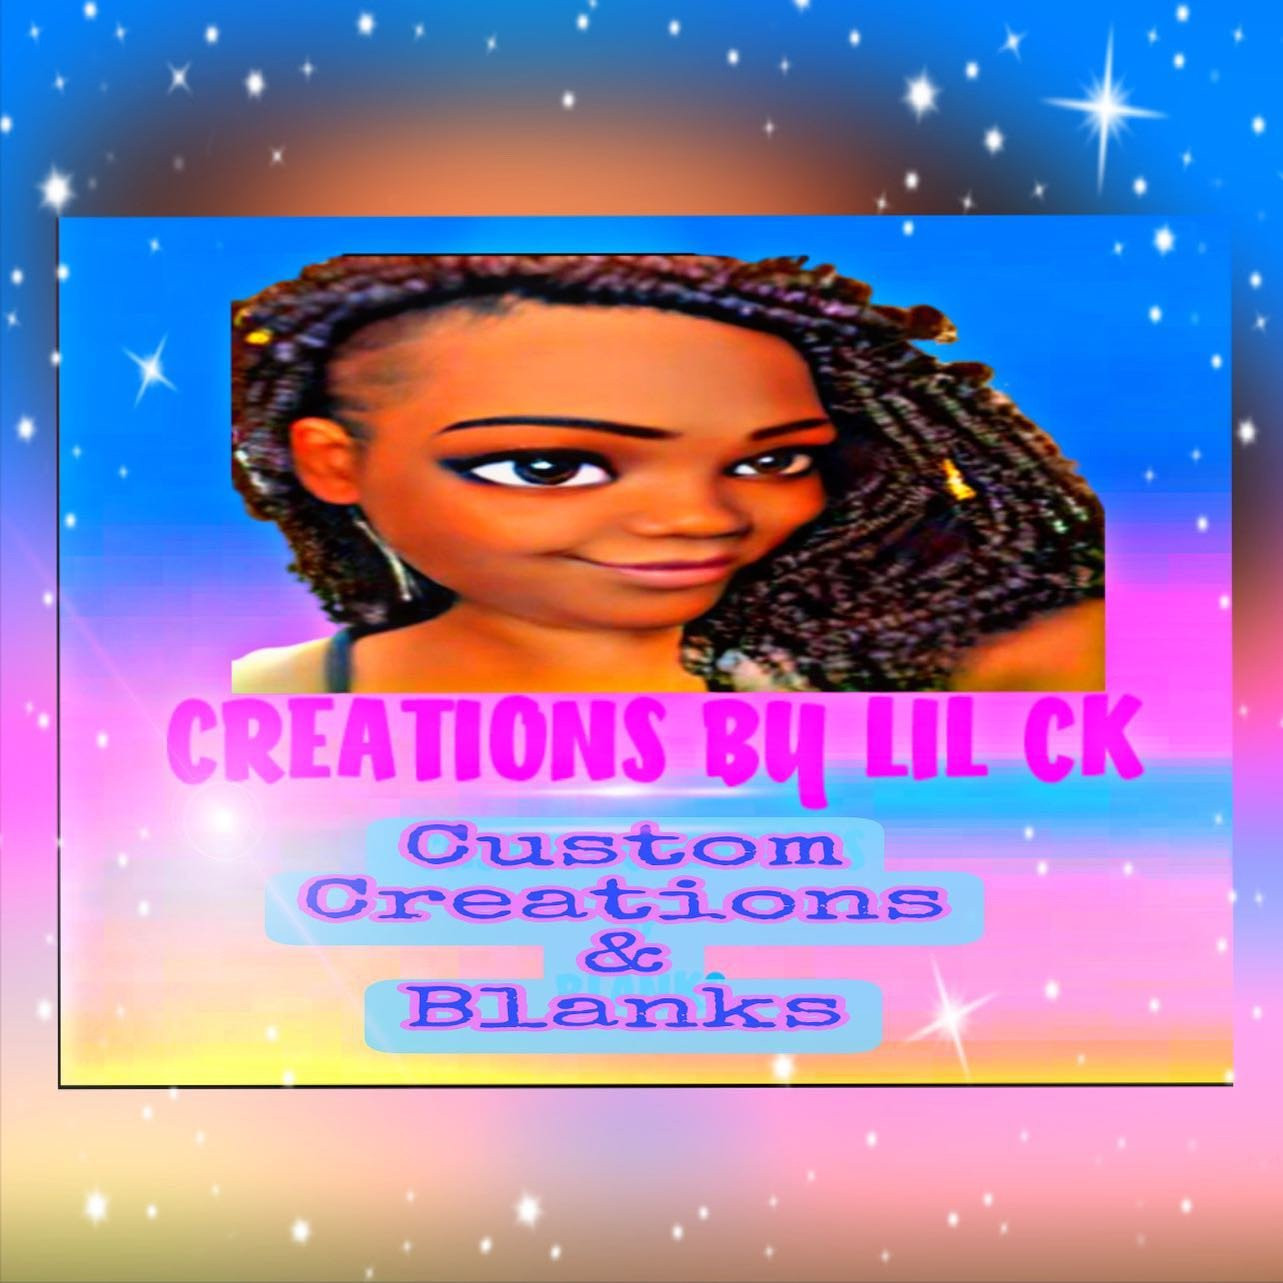 creationsbylilck's profile picture